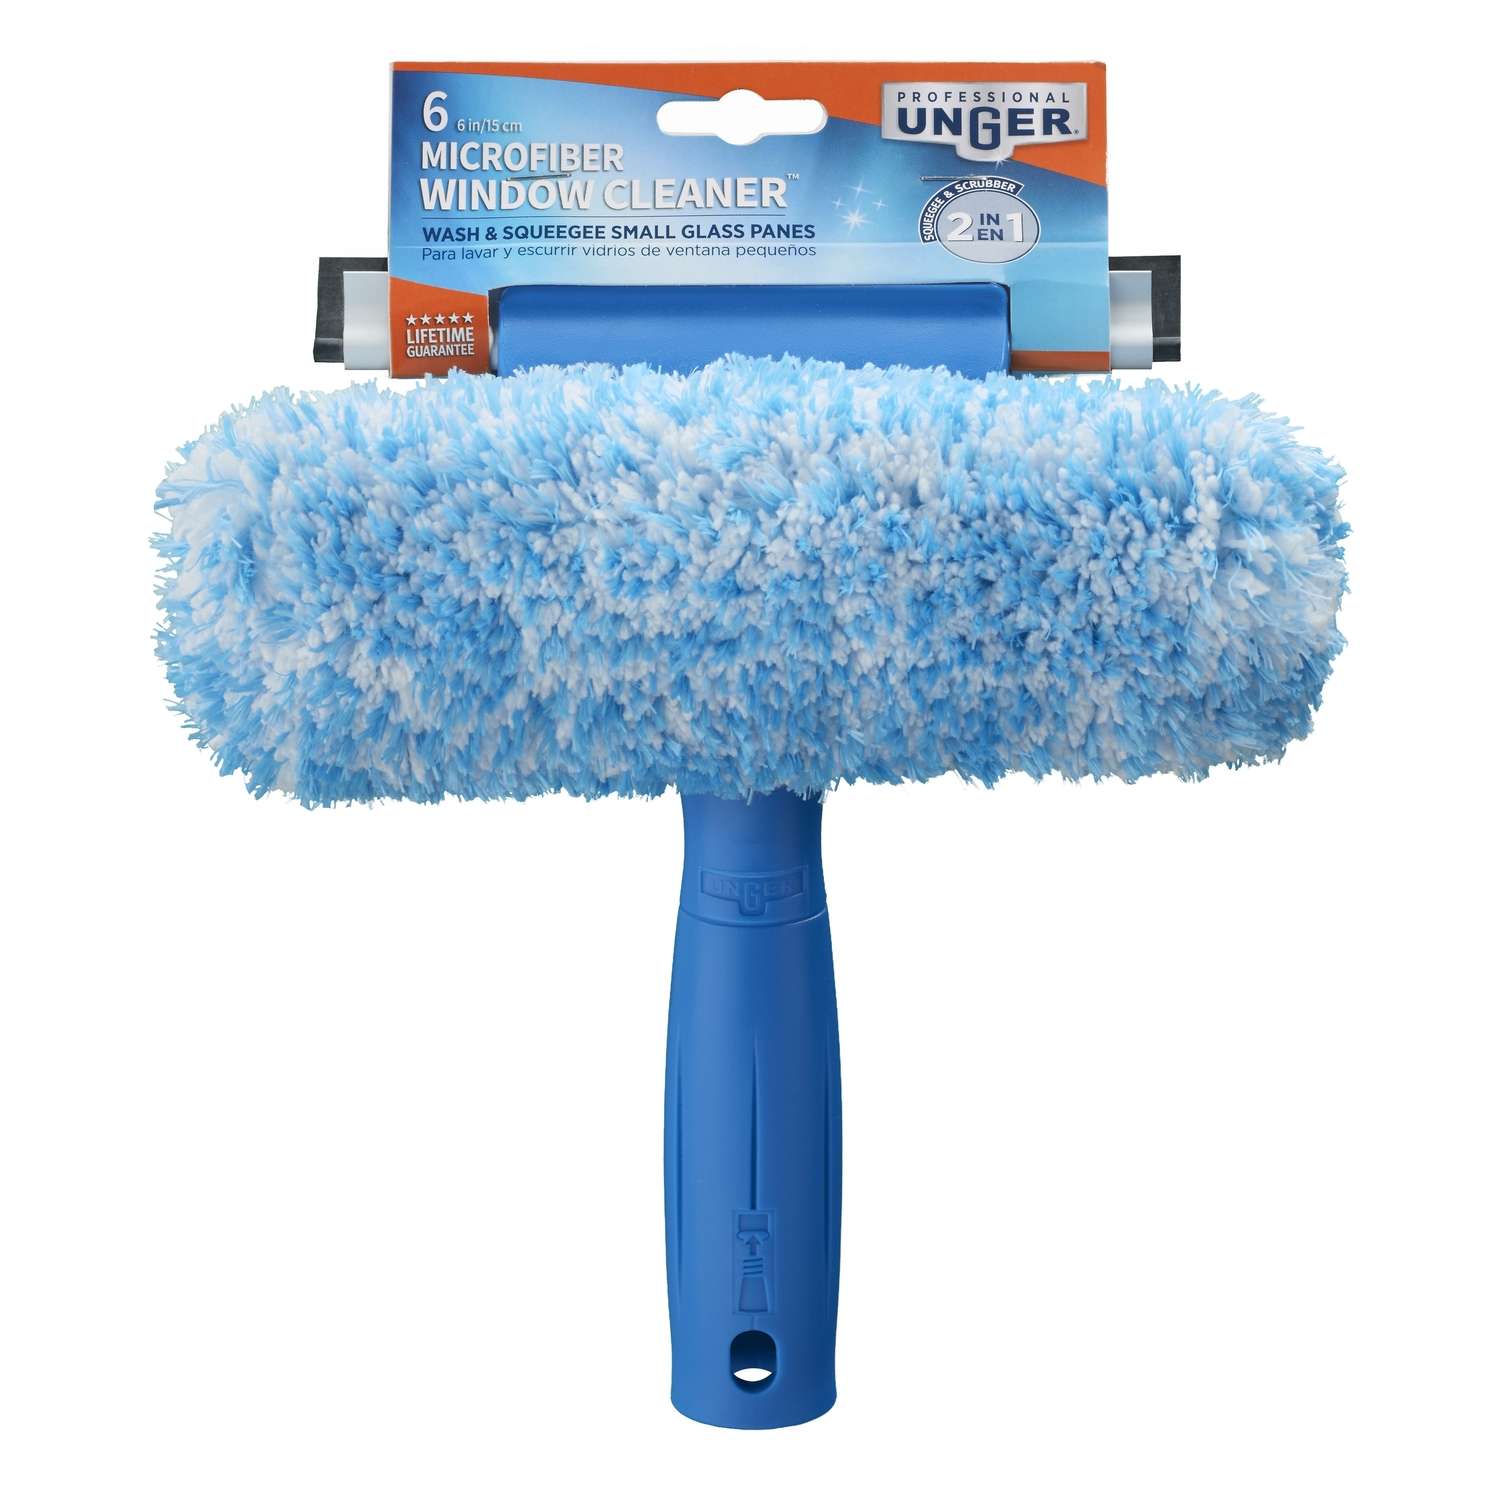 Desk and Table Cleaning - Unger USA - Commercial Cleaning Tools